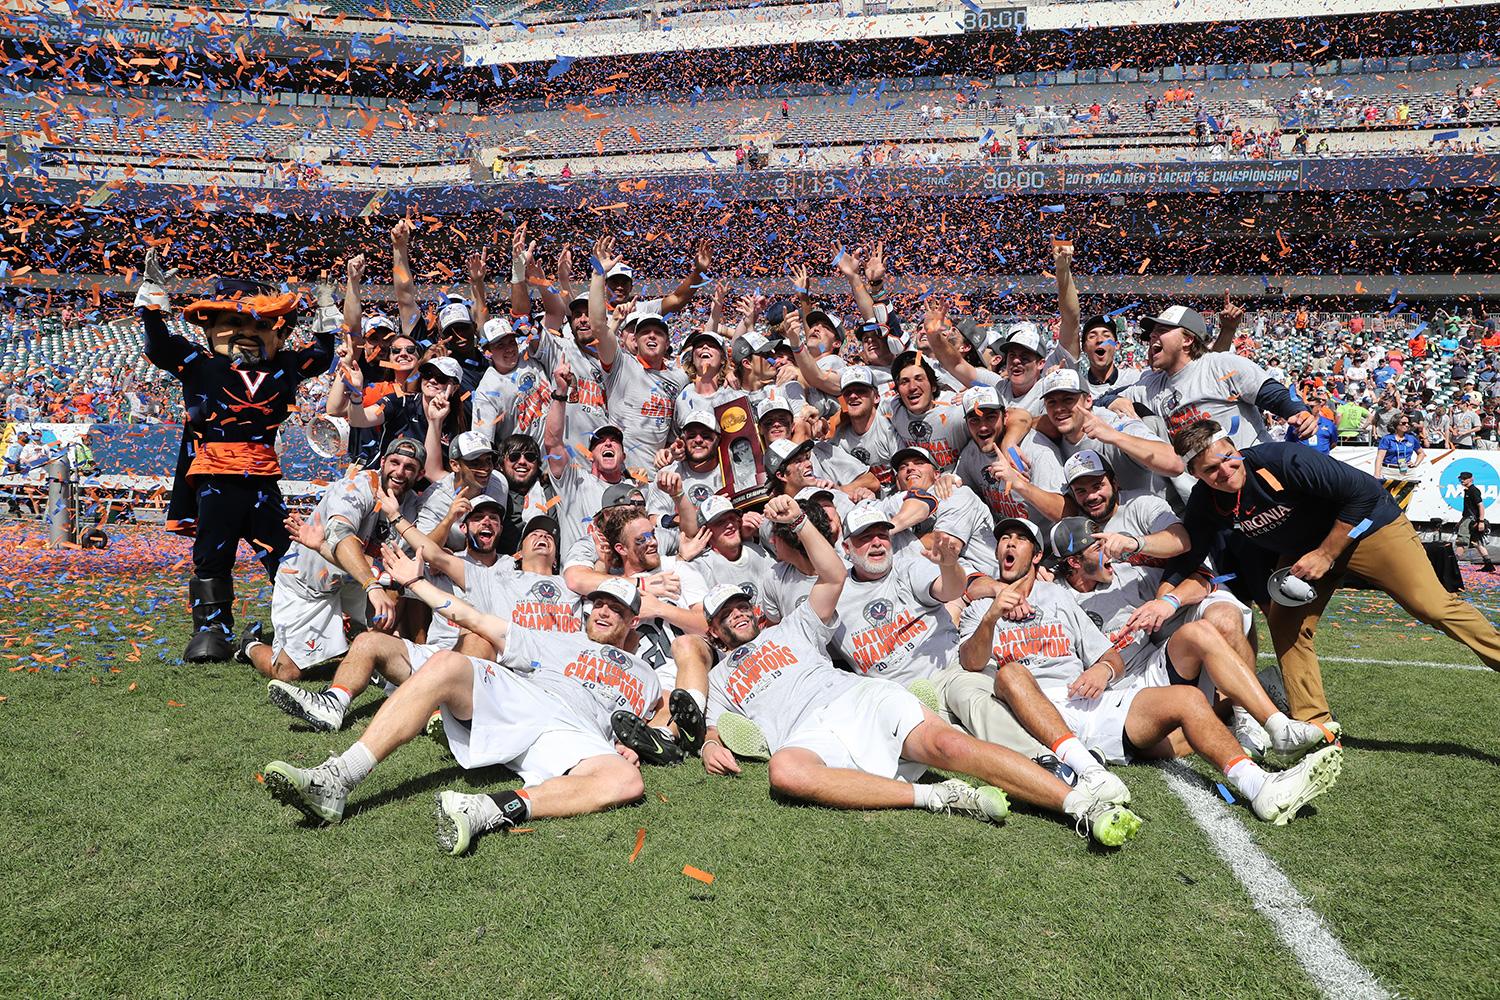 The UVA men’s lacrosse team celebrate on the field with a team photo while holding the NCAA trophy